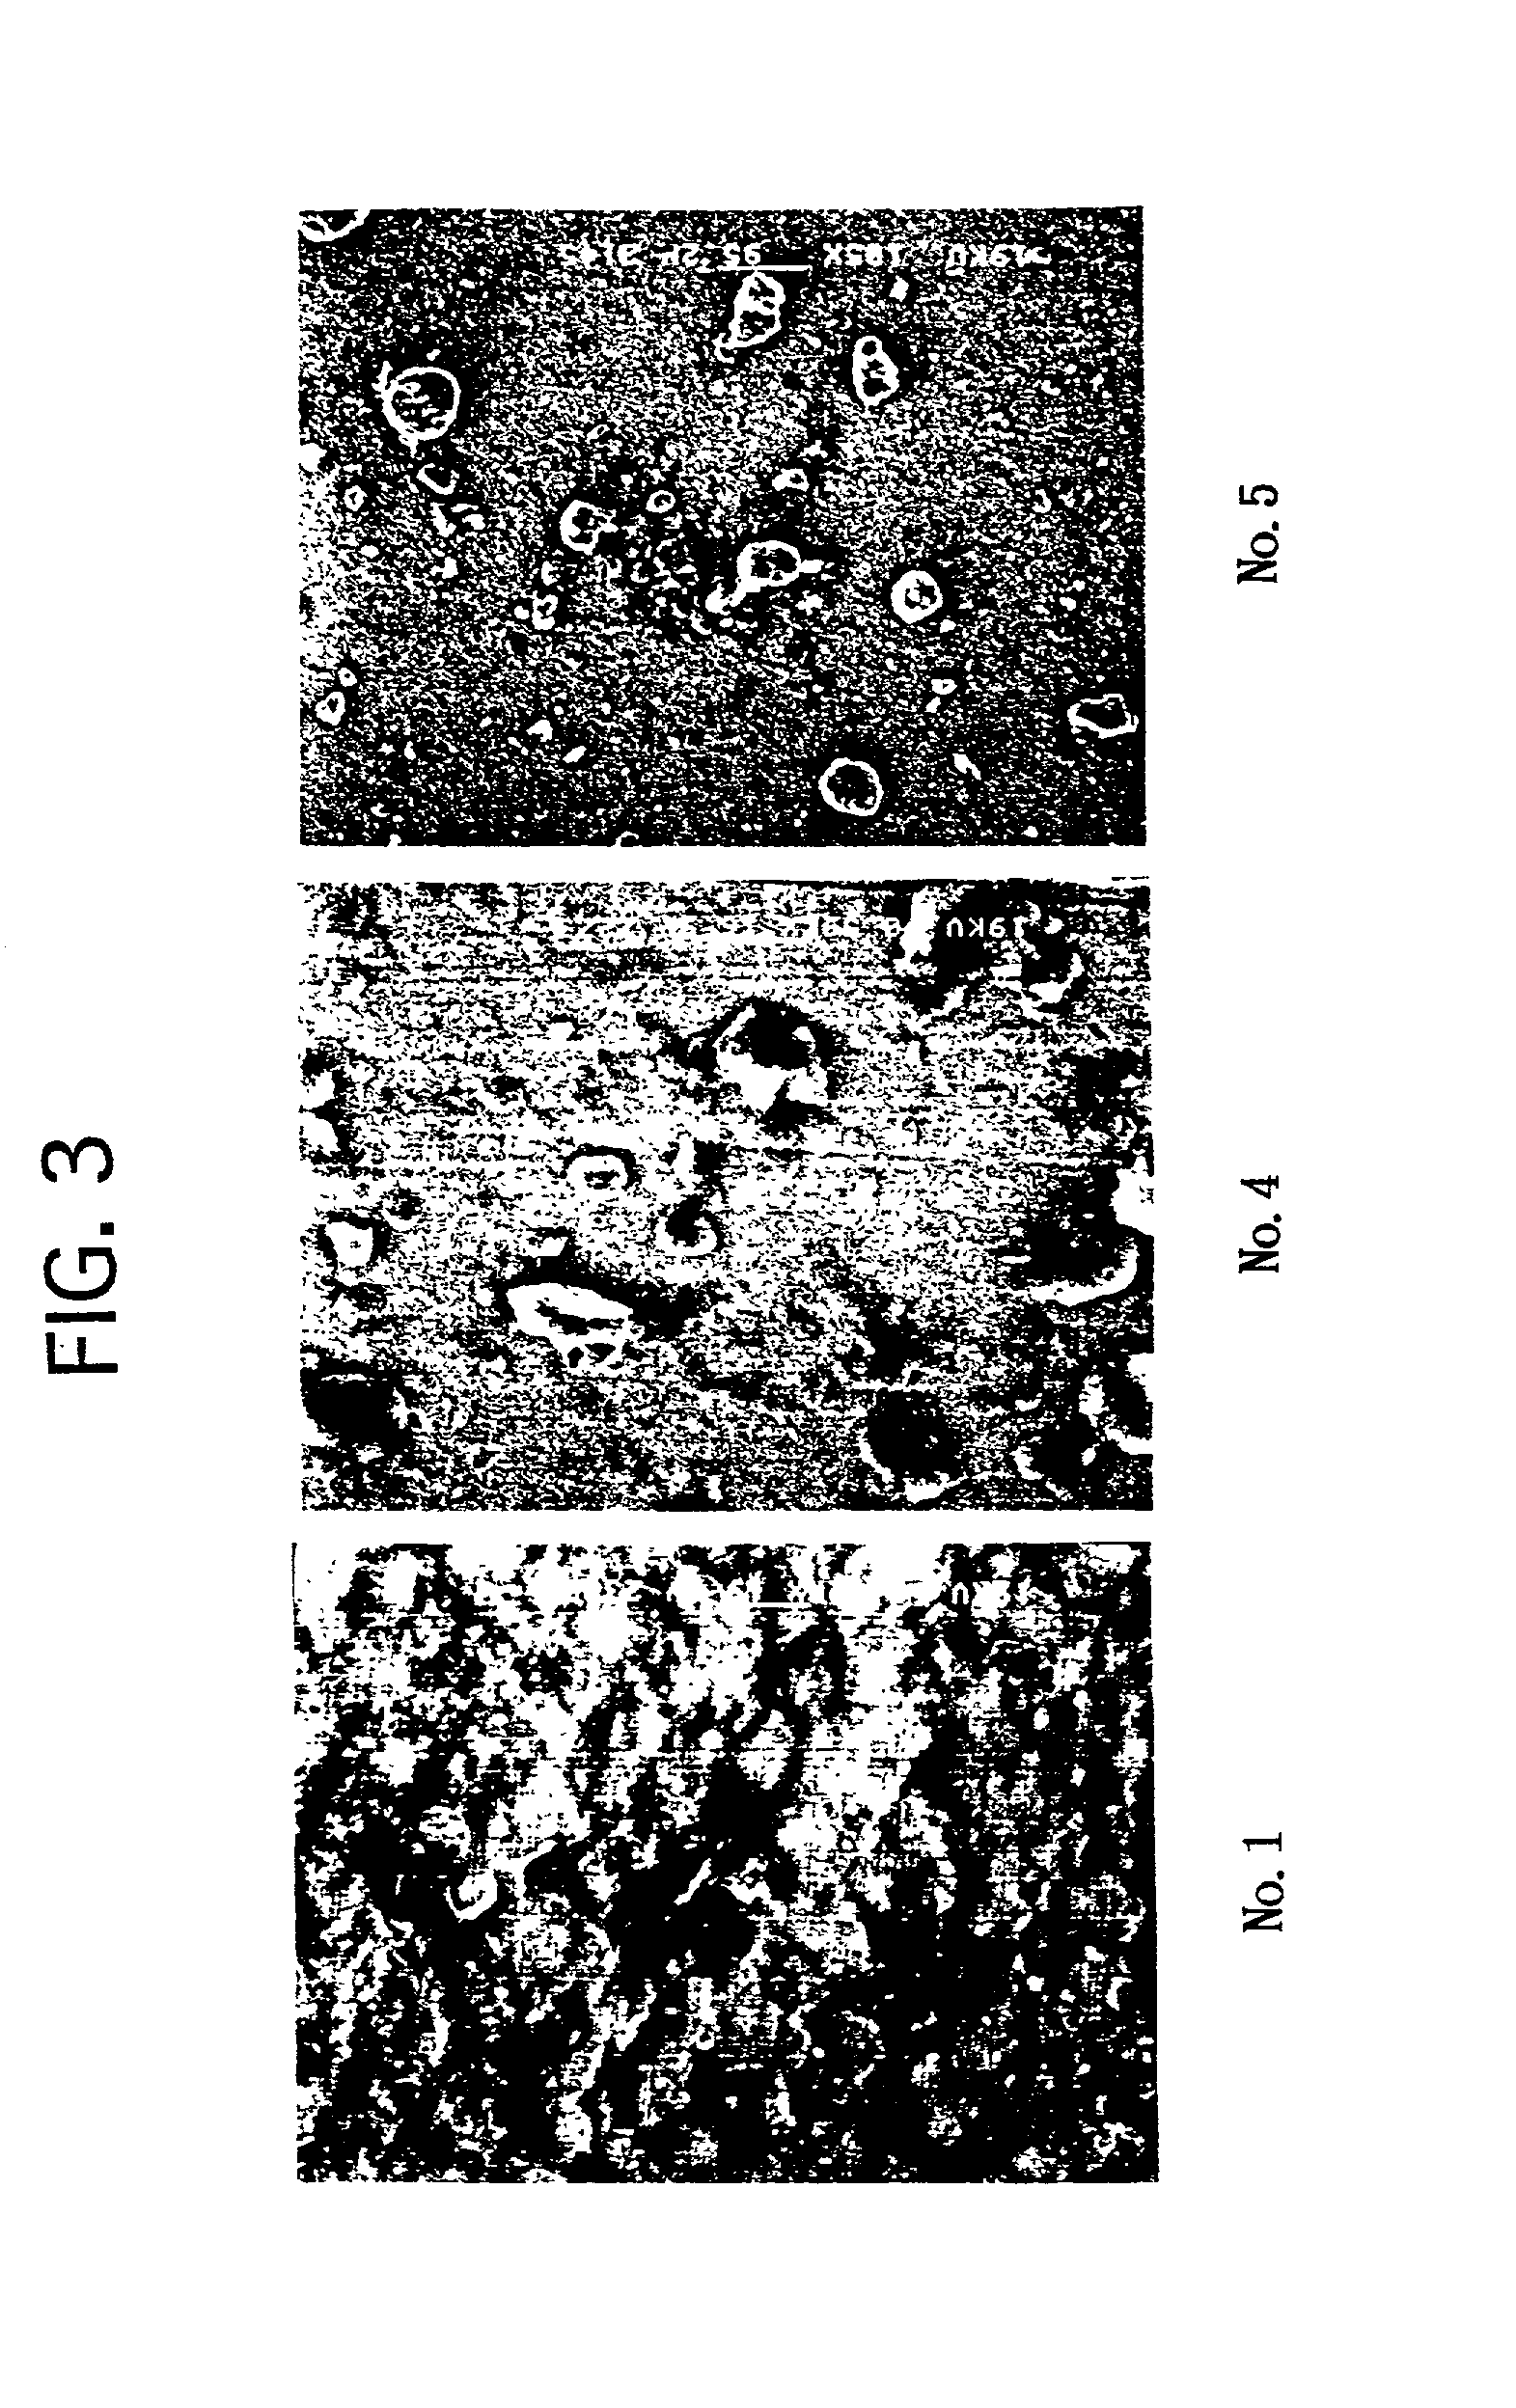 Method of forming a powder compact